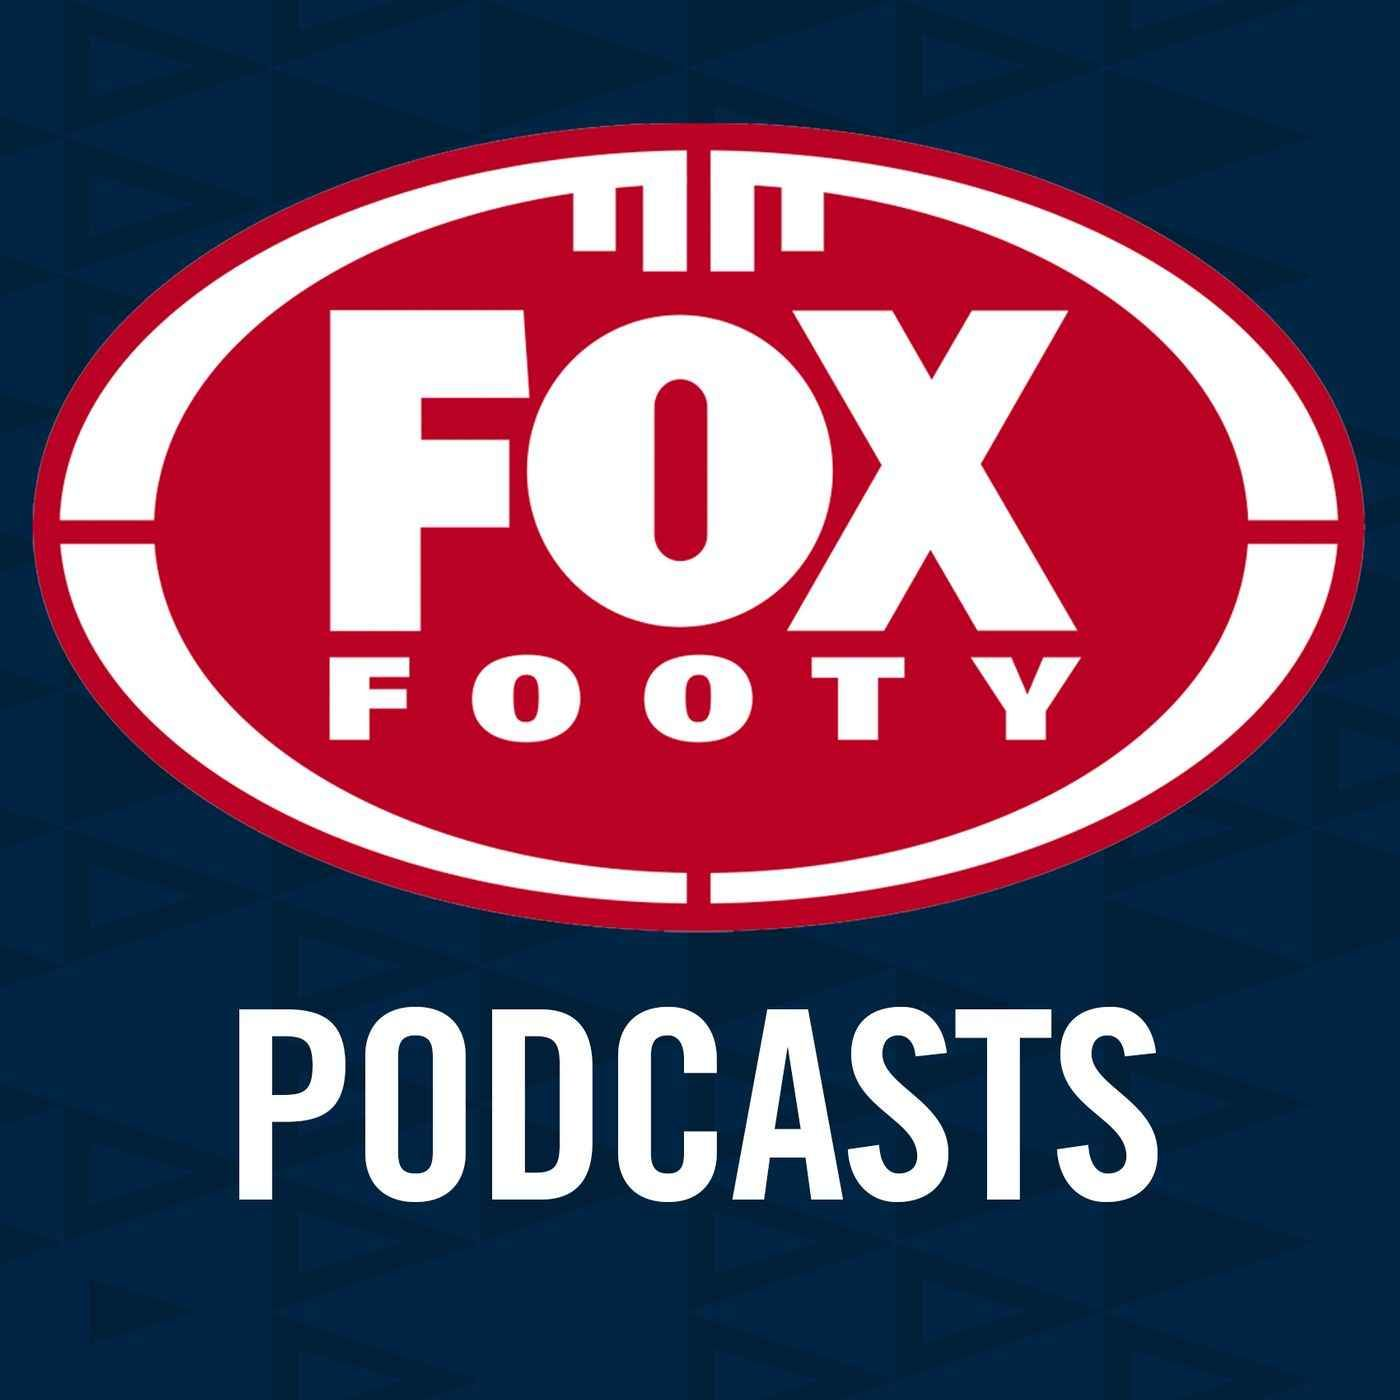 AFL 360: Nick Riewoldt - "I'm excited now"